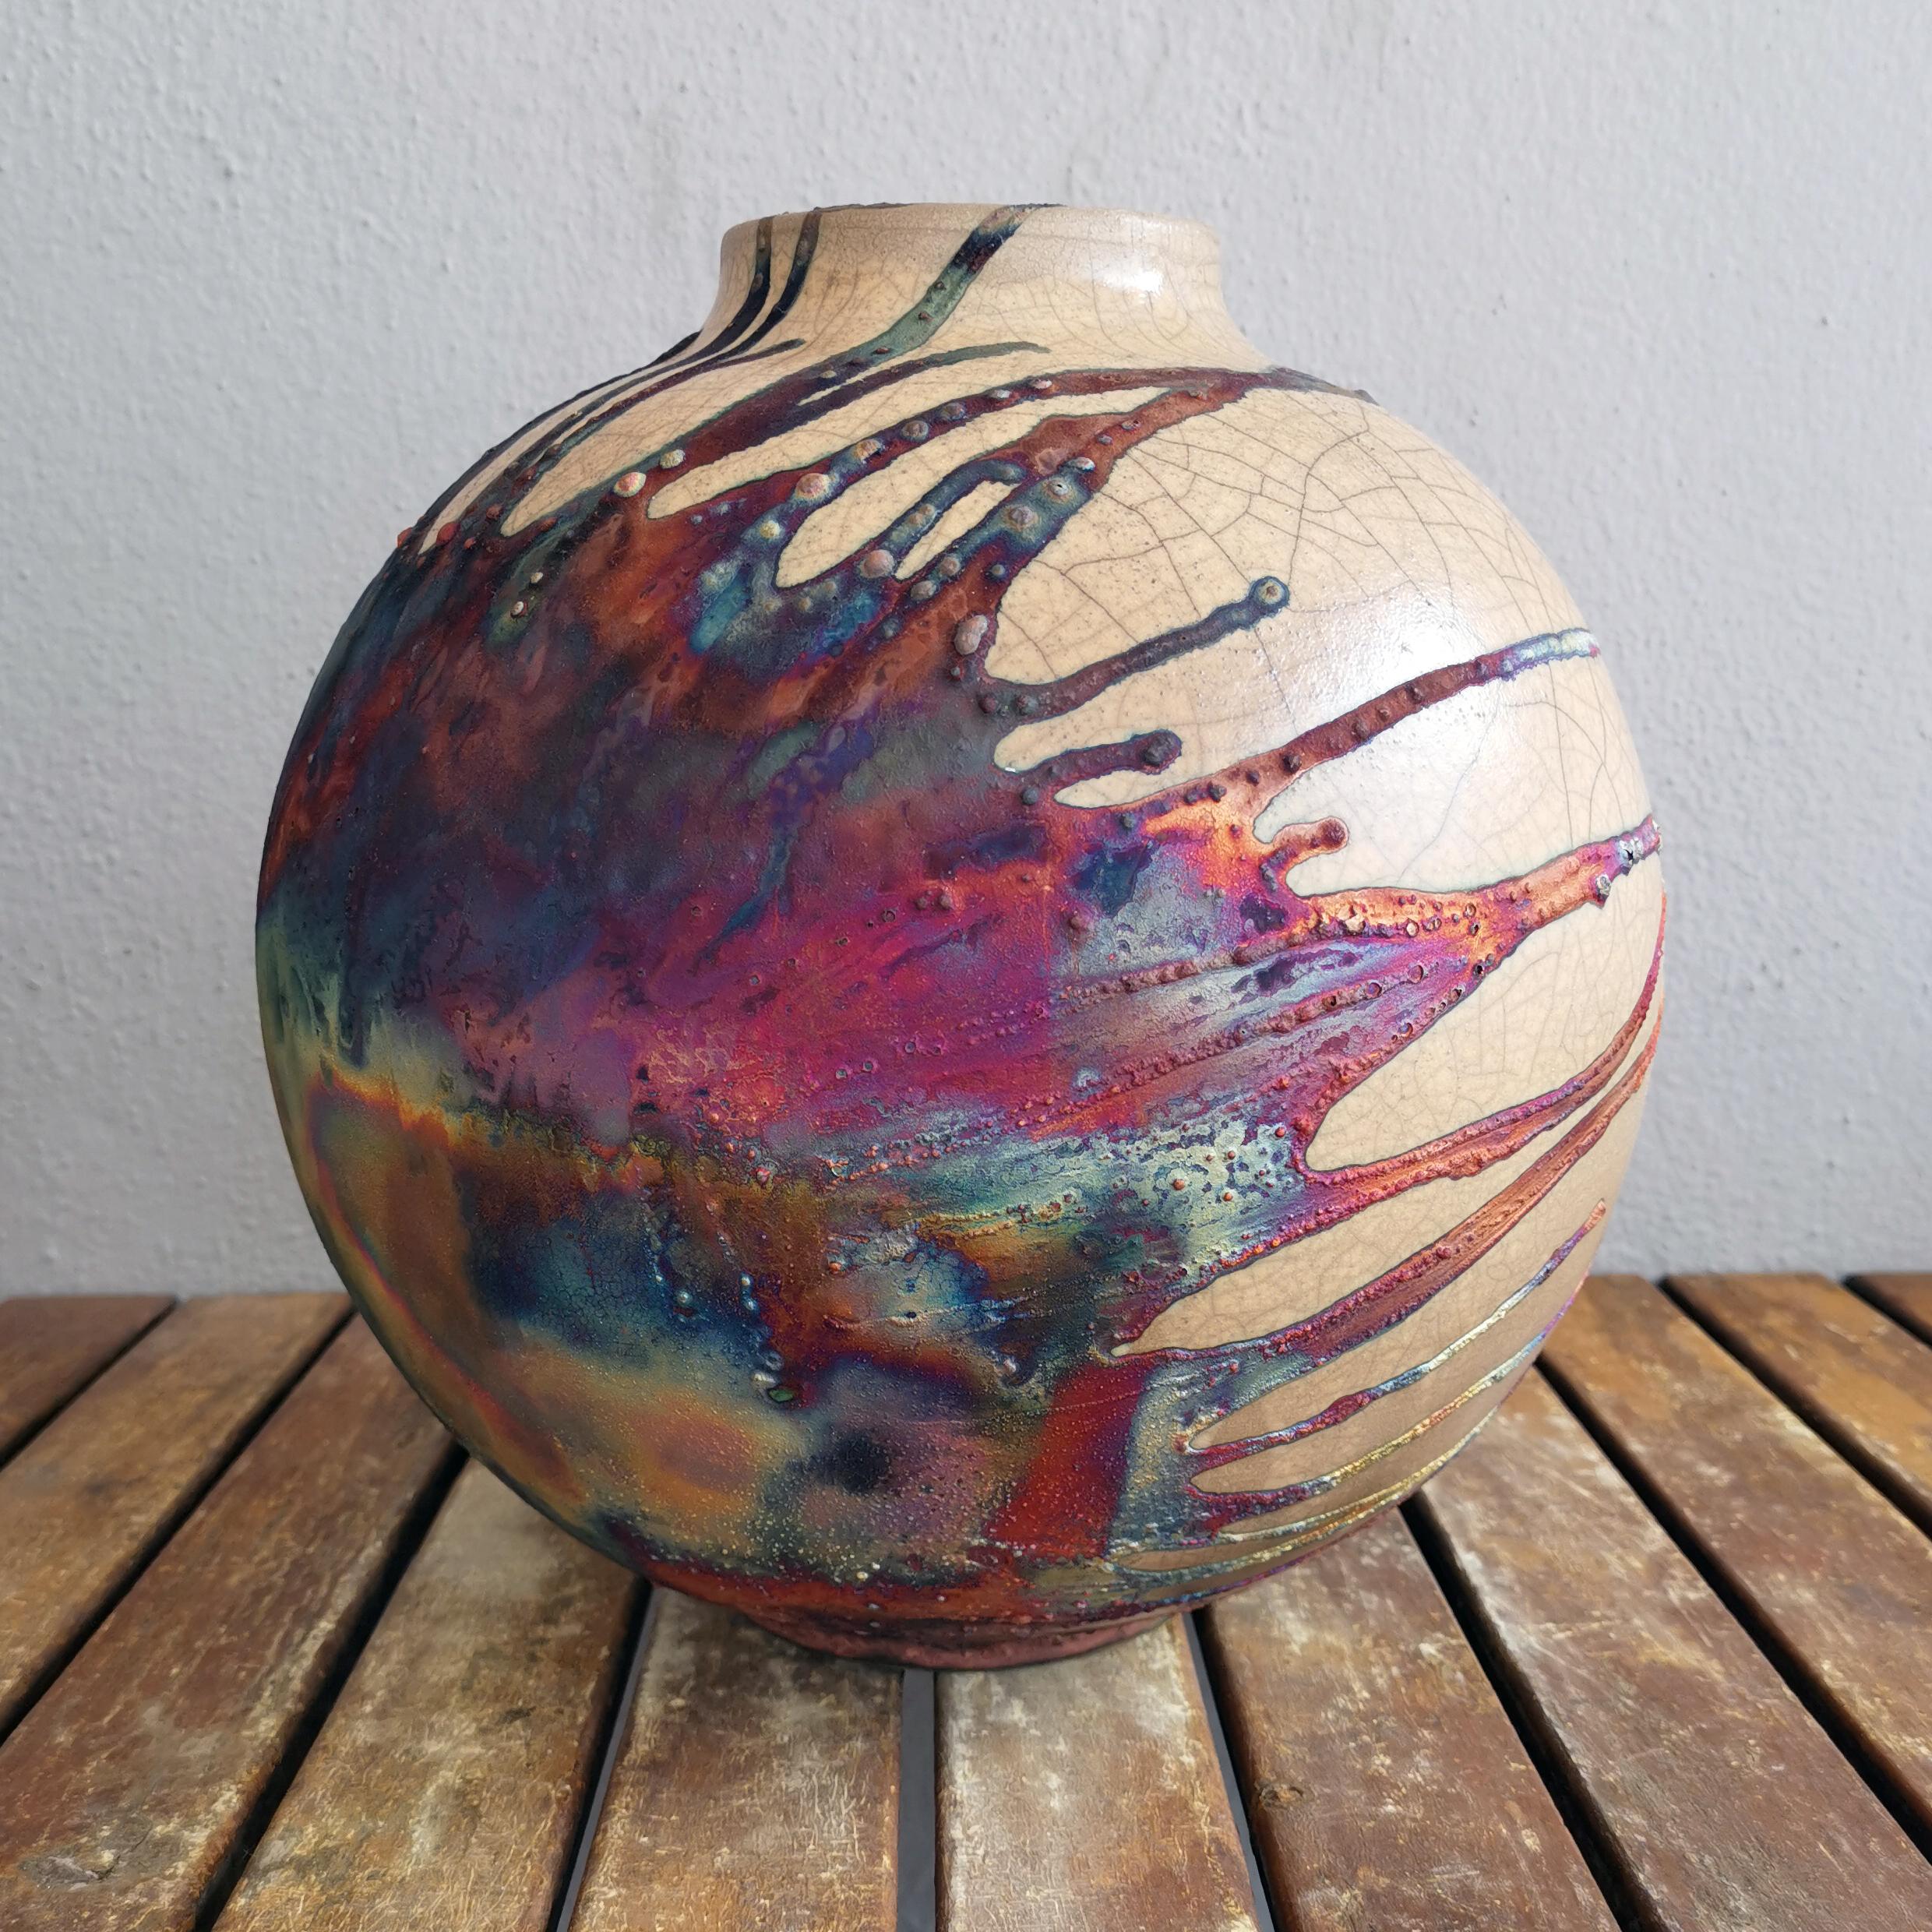 A mesmerizing sight to behold as soon as the rainbow-like patinas catch your eye. This globe vase is a round, capacious piece produced using the Raku technique, resulting in a beautiful unpredictable finish. This vase would be the perfect